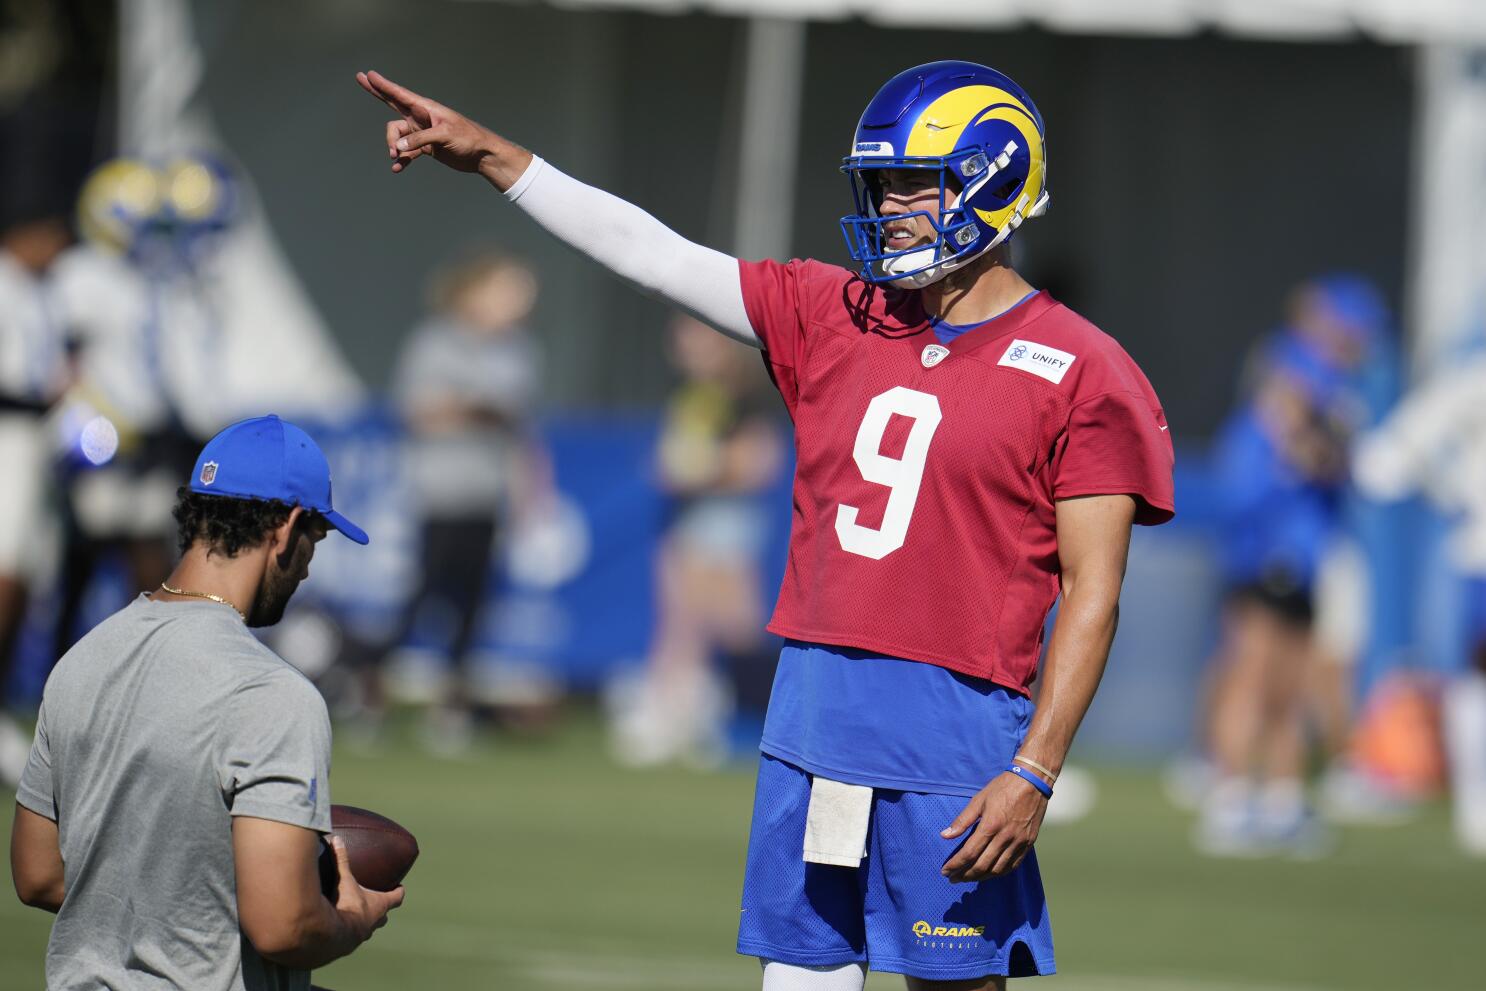 Matthew Stafford is the game-changing QB the Rams thought he'd be